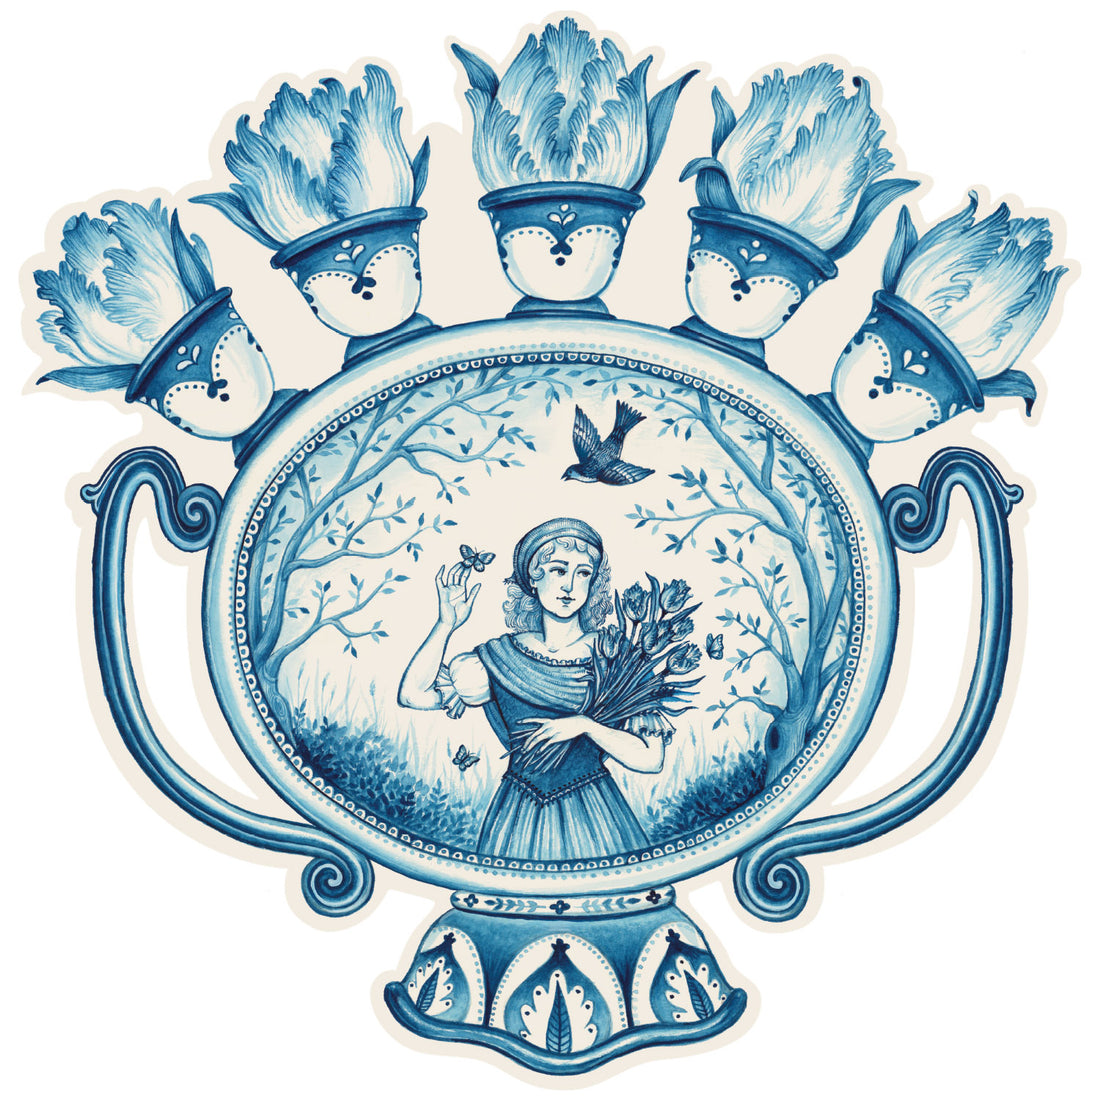 A die-cut illustration, inspired by French pastoral toile, of a monochrome indigo blue vase adorned with a painting of a young woman holding flowers.